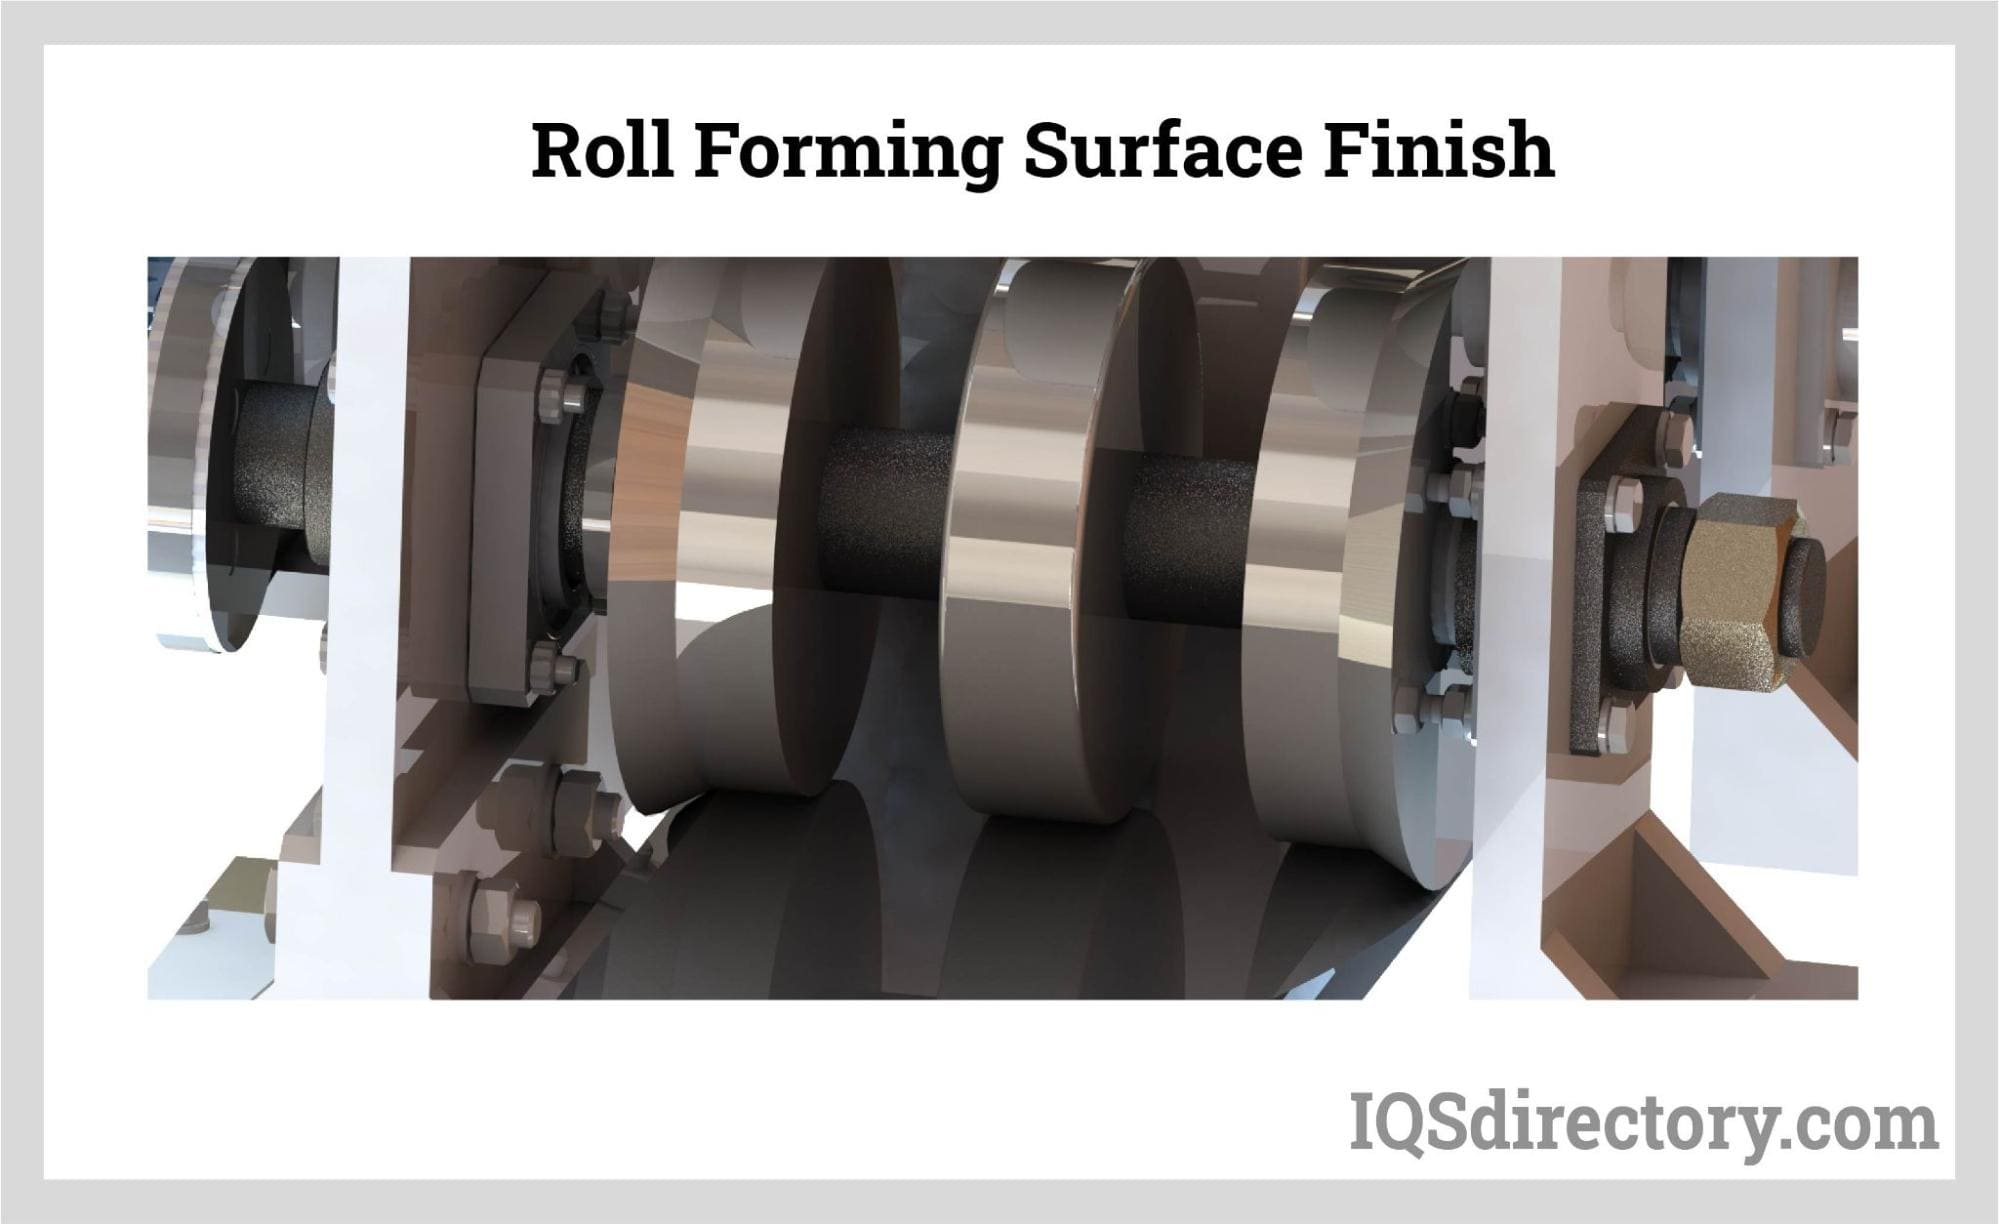 Roll Forming Surface Finish